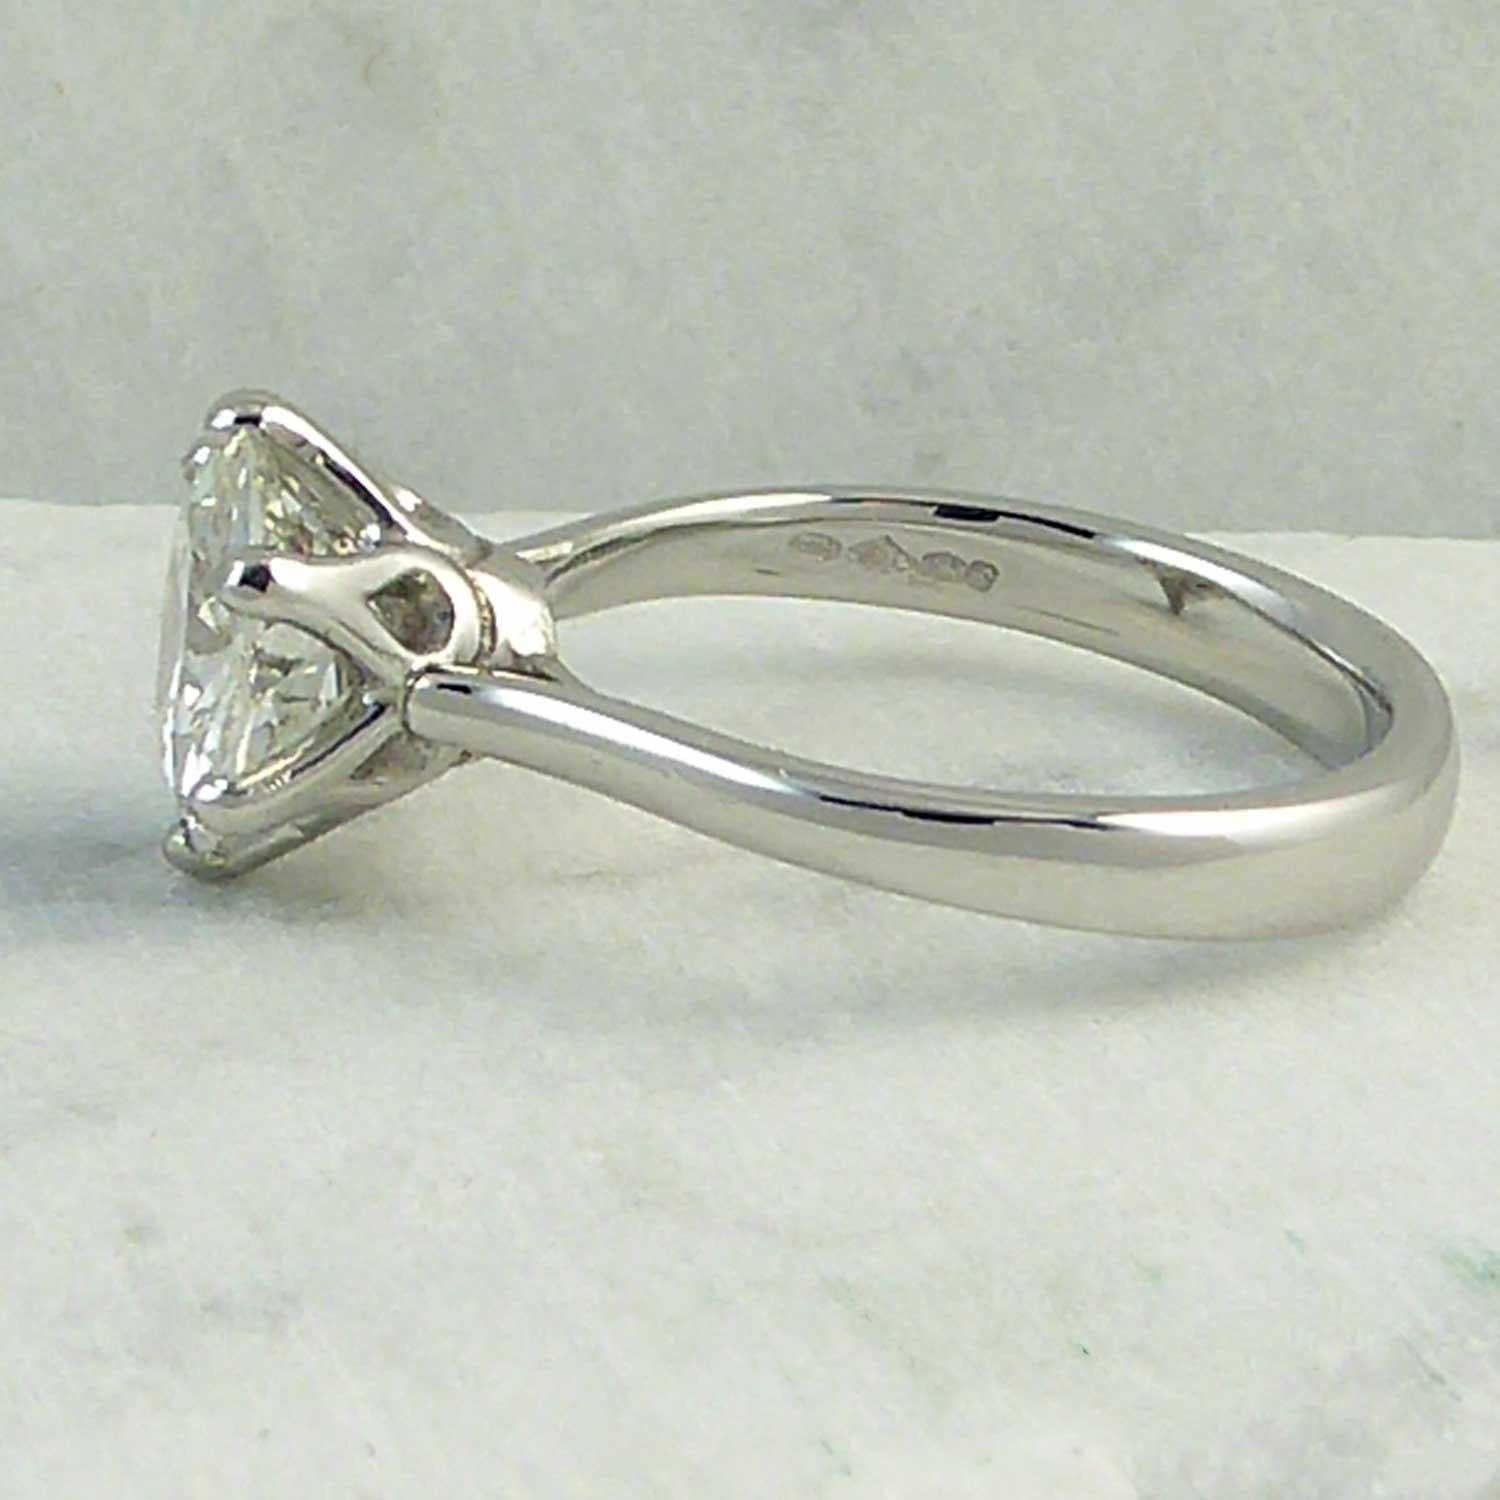 2.02 Carat Early Brilliant Cut Diamond Traditionally Set in a New Platinum Mount 3